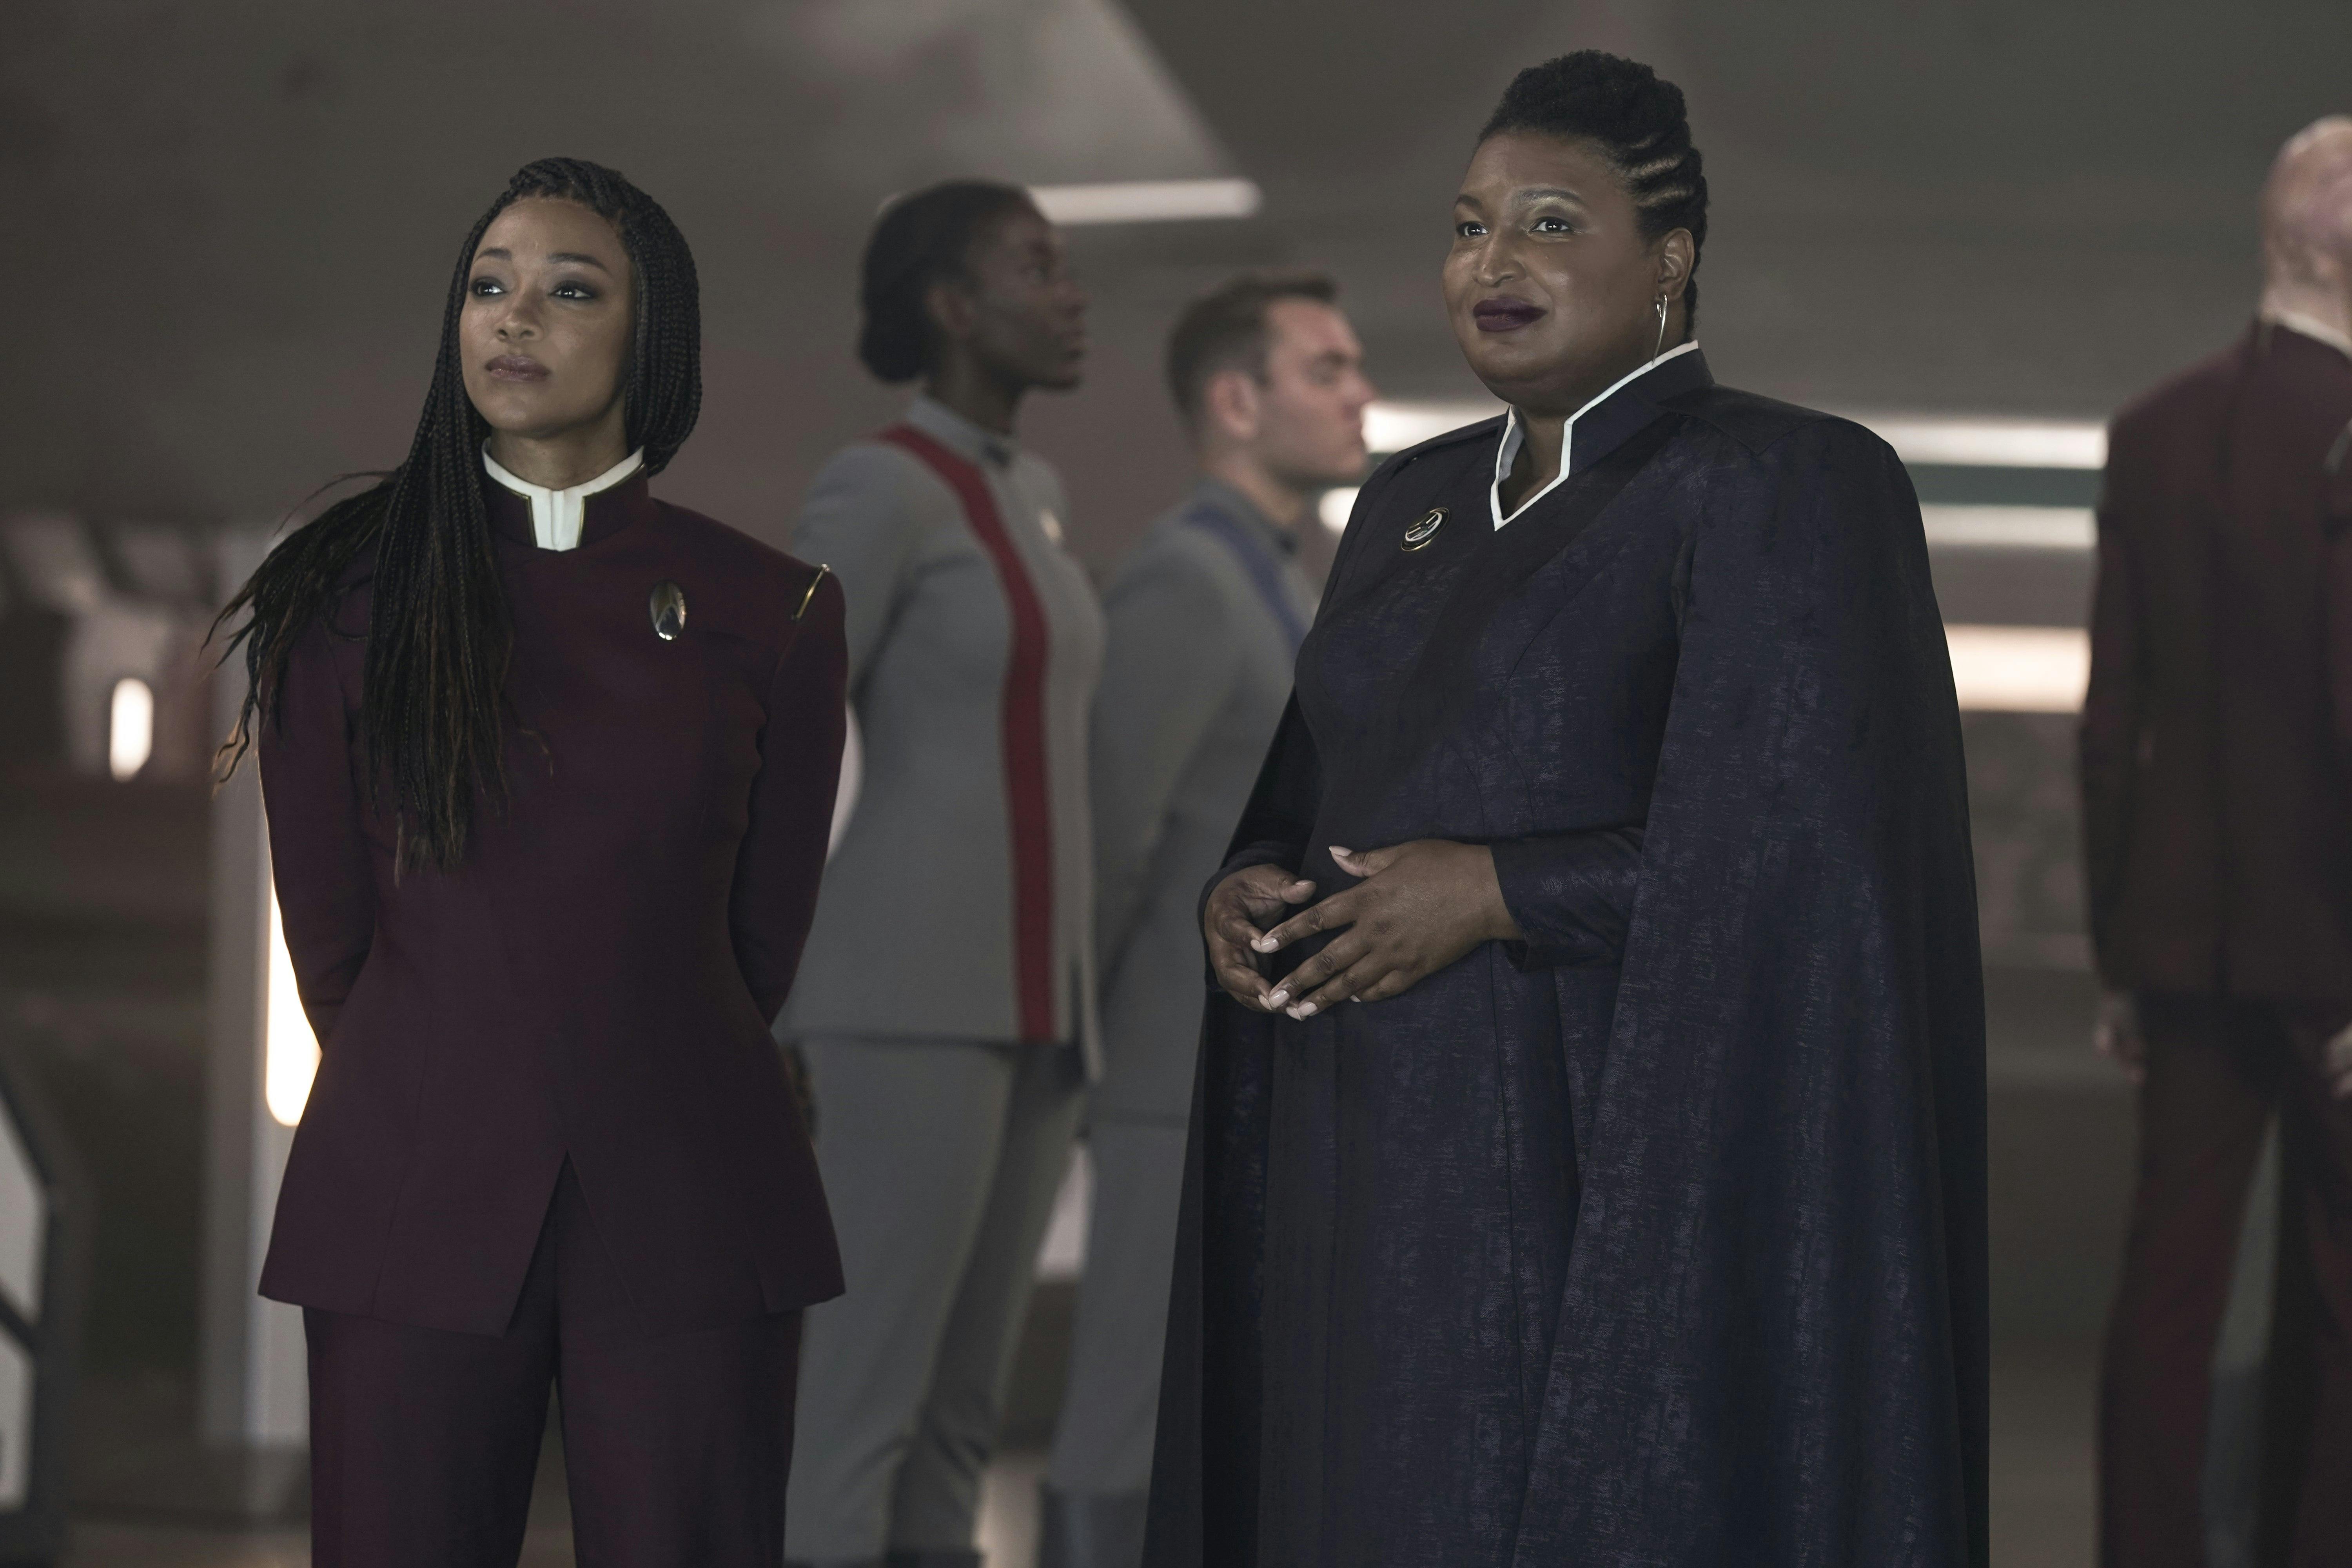 Star Trek: Discovery - "Coming Home"